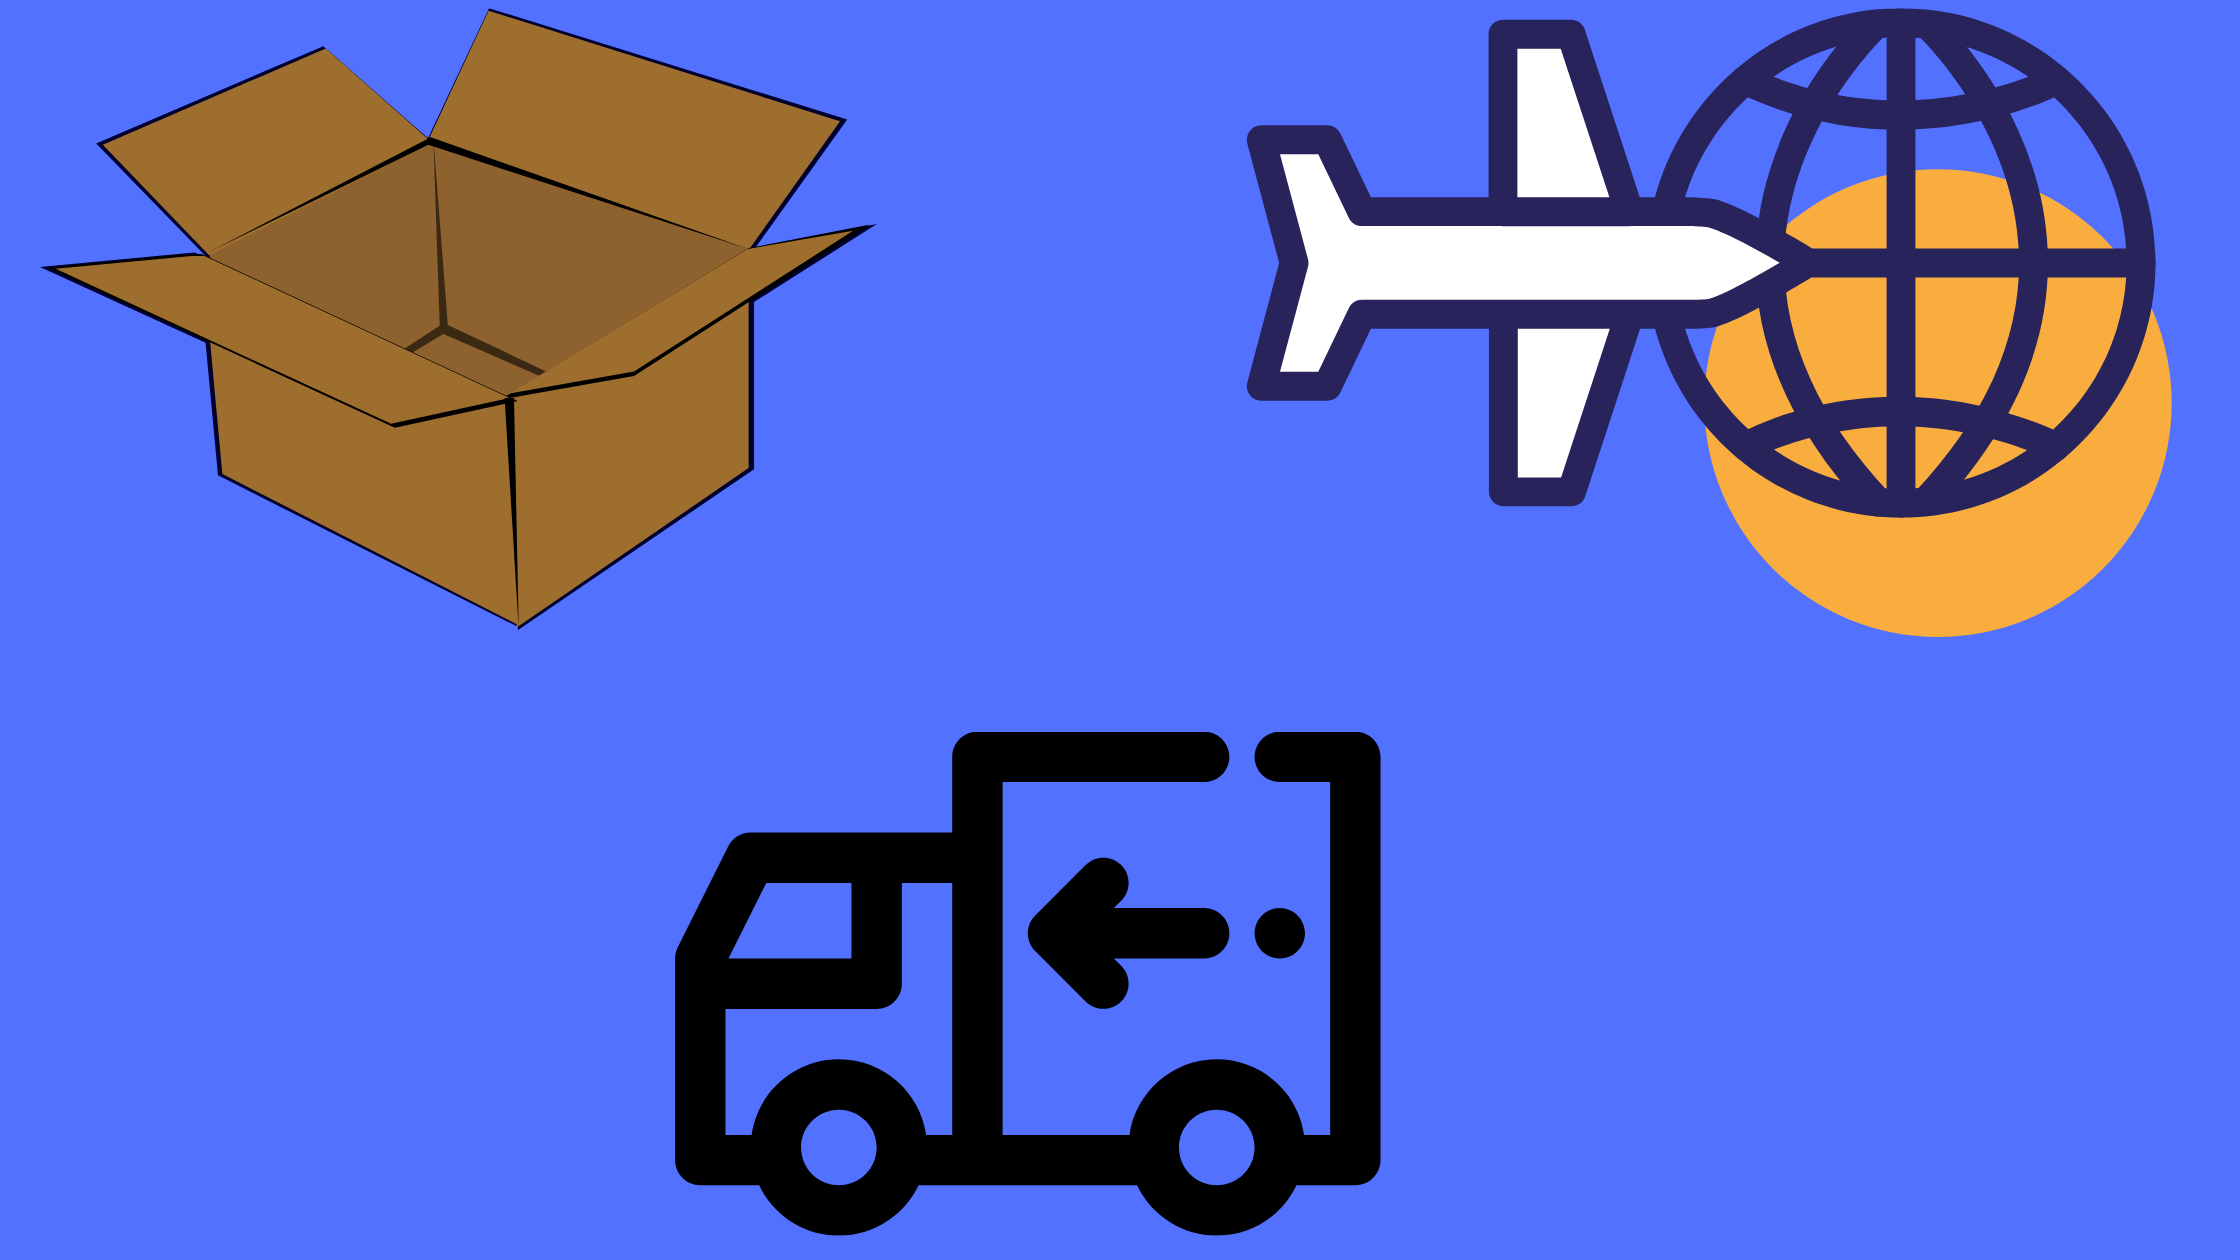 How to Start Dropshipping for Free